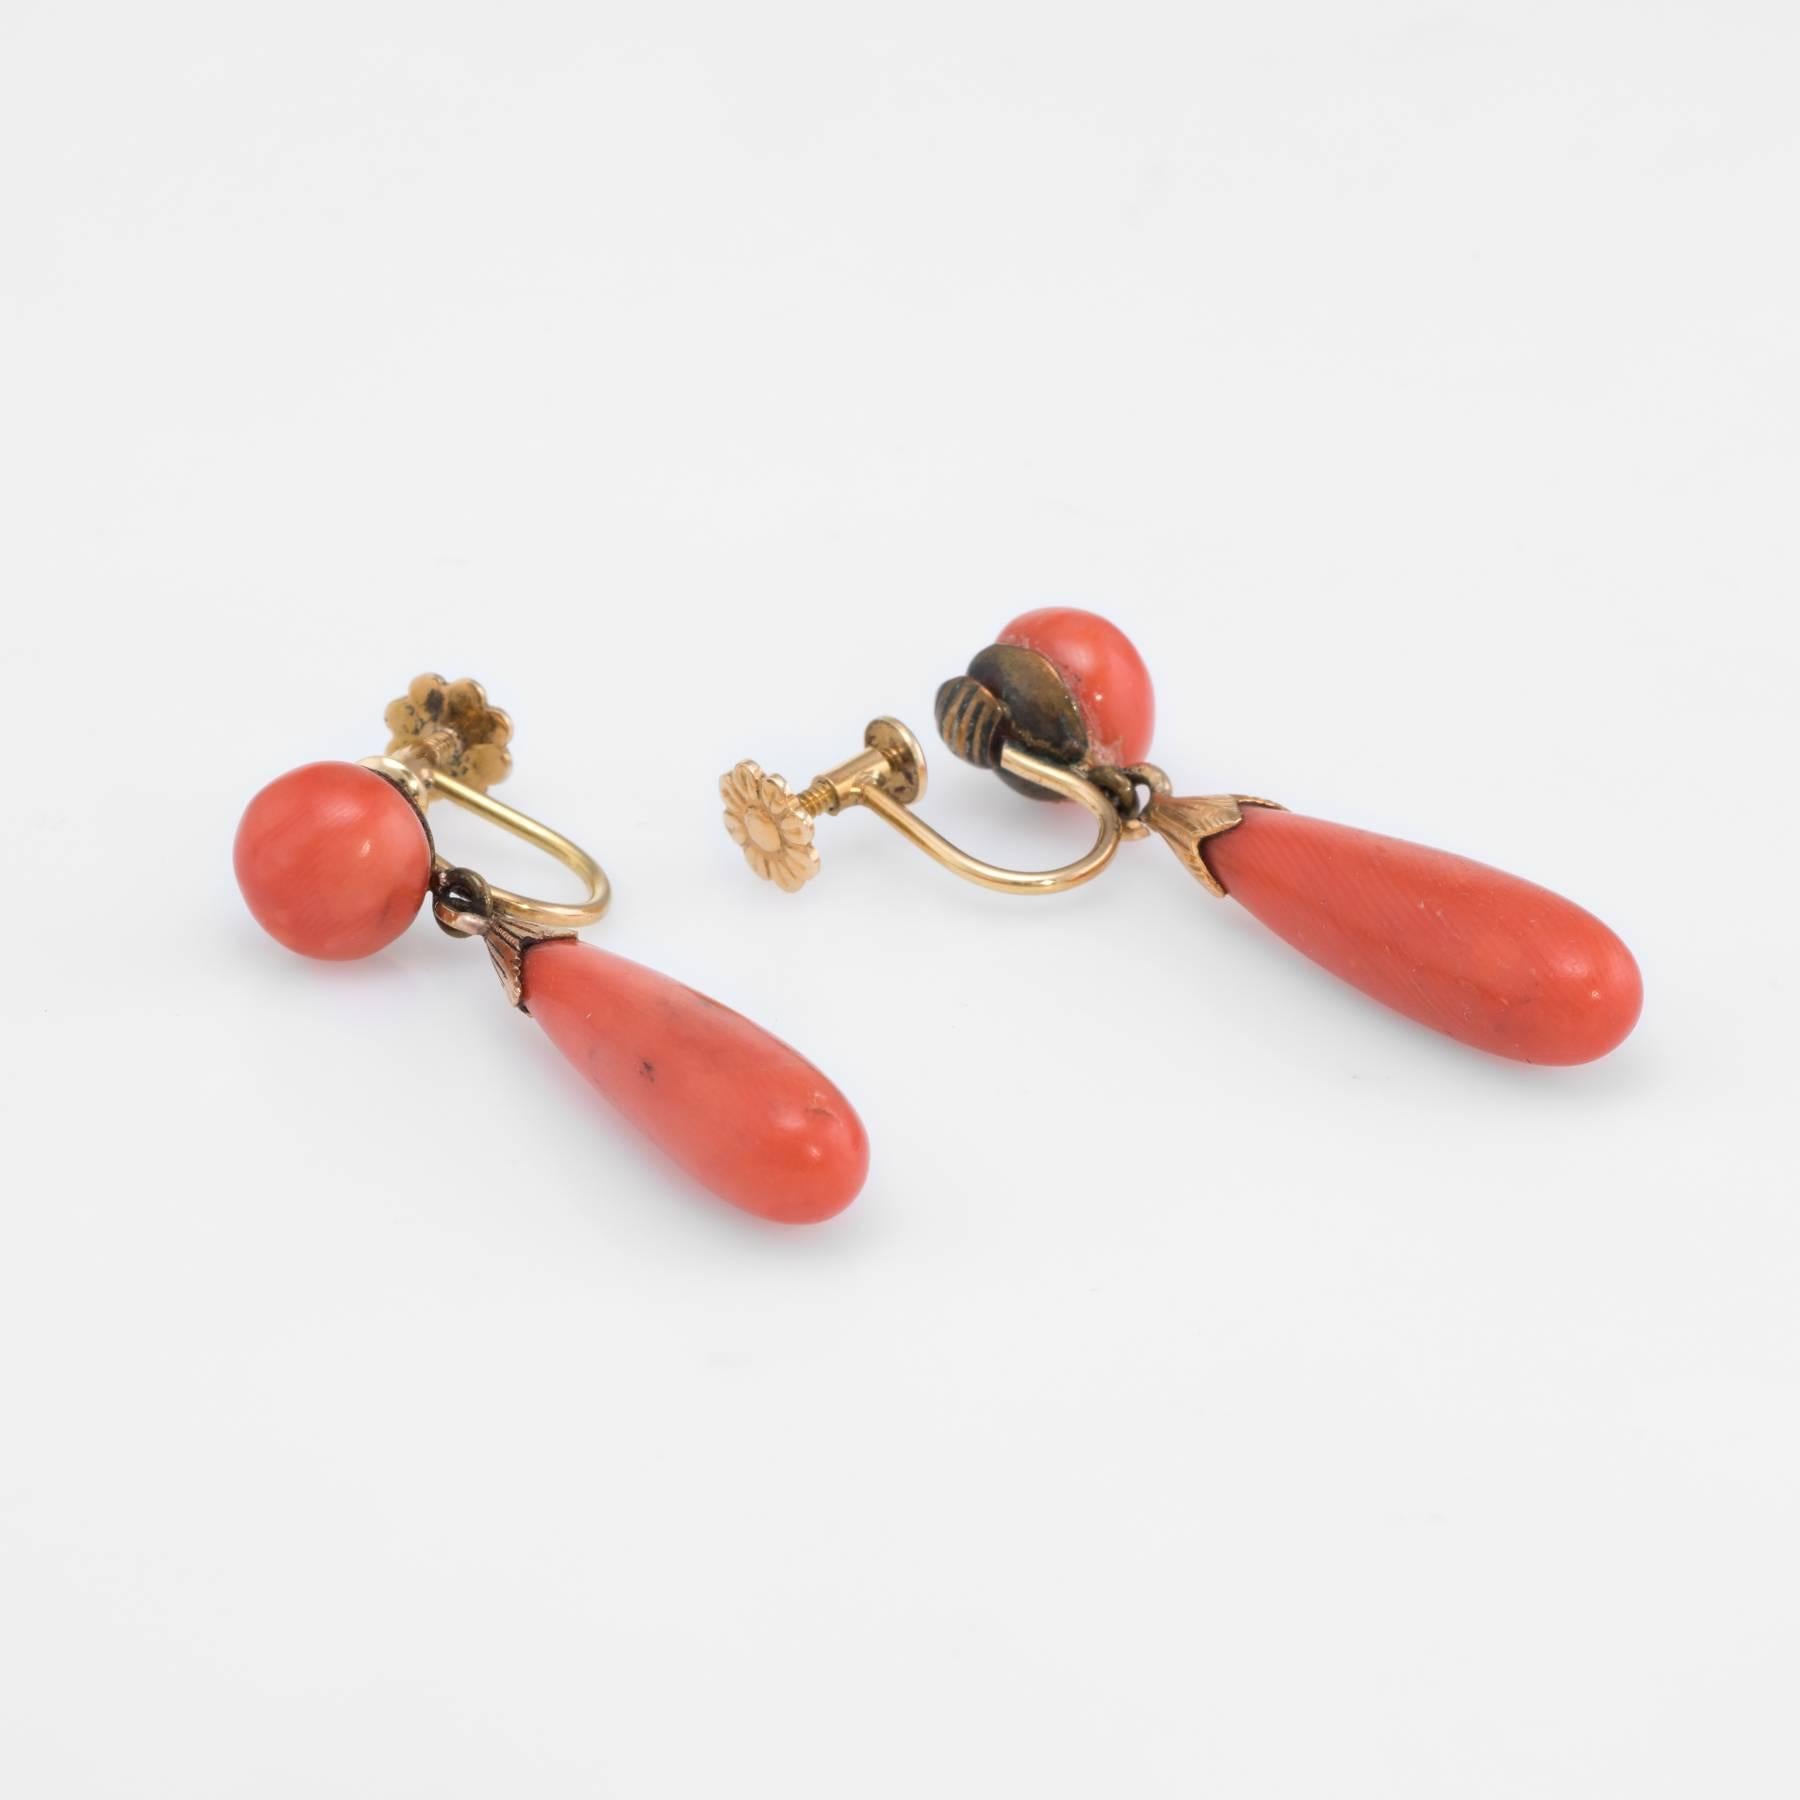 Overview:

Elegant pair of vintage Art Deco era earrings (circa 1920s to 1930s), crafted in 18k yellow gold. 

Natural coral measures 23mm x 6.5mm (lower) and 8.5mm (upper). The coral weight I s estimated at 5.75 carats. The coral is in excellent